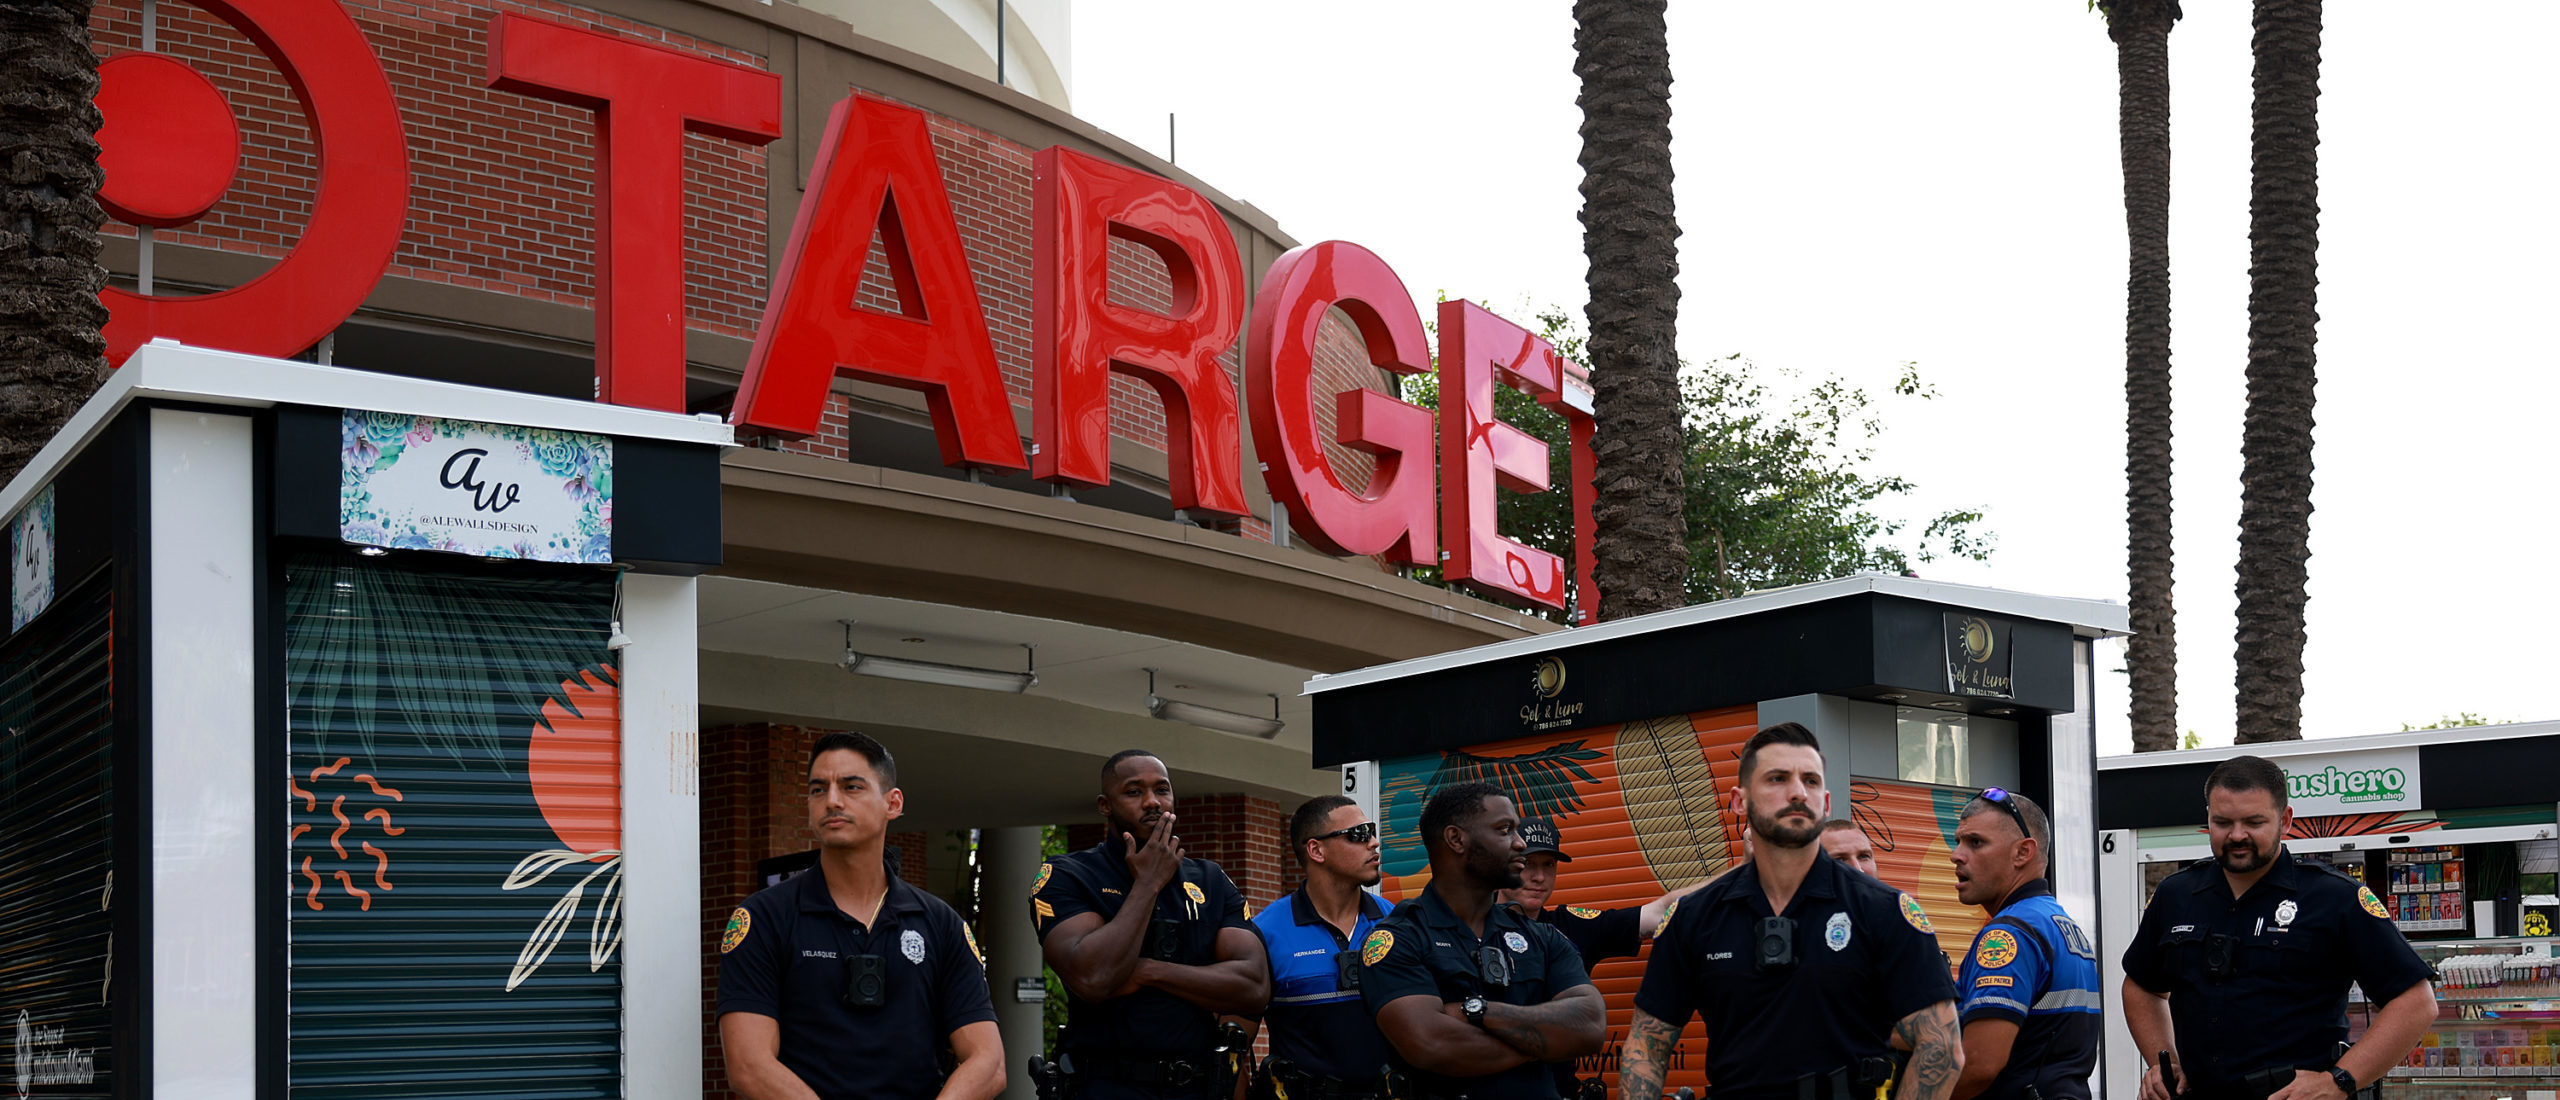 Target’s Sales Crumble For The First Time In Years Amid Backlash Over ...